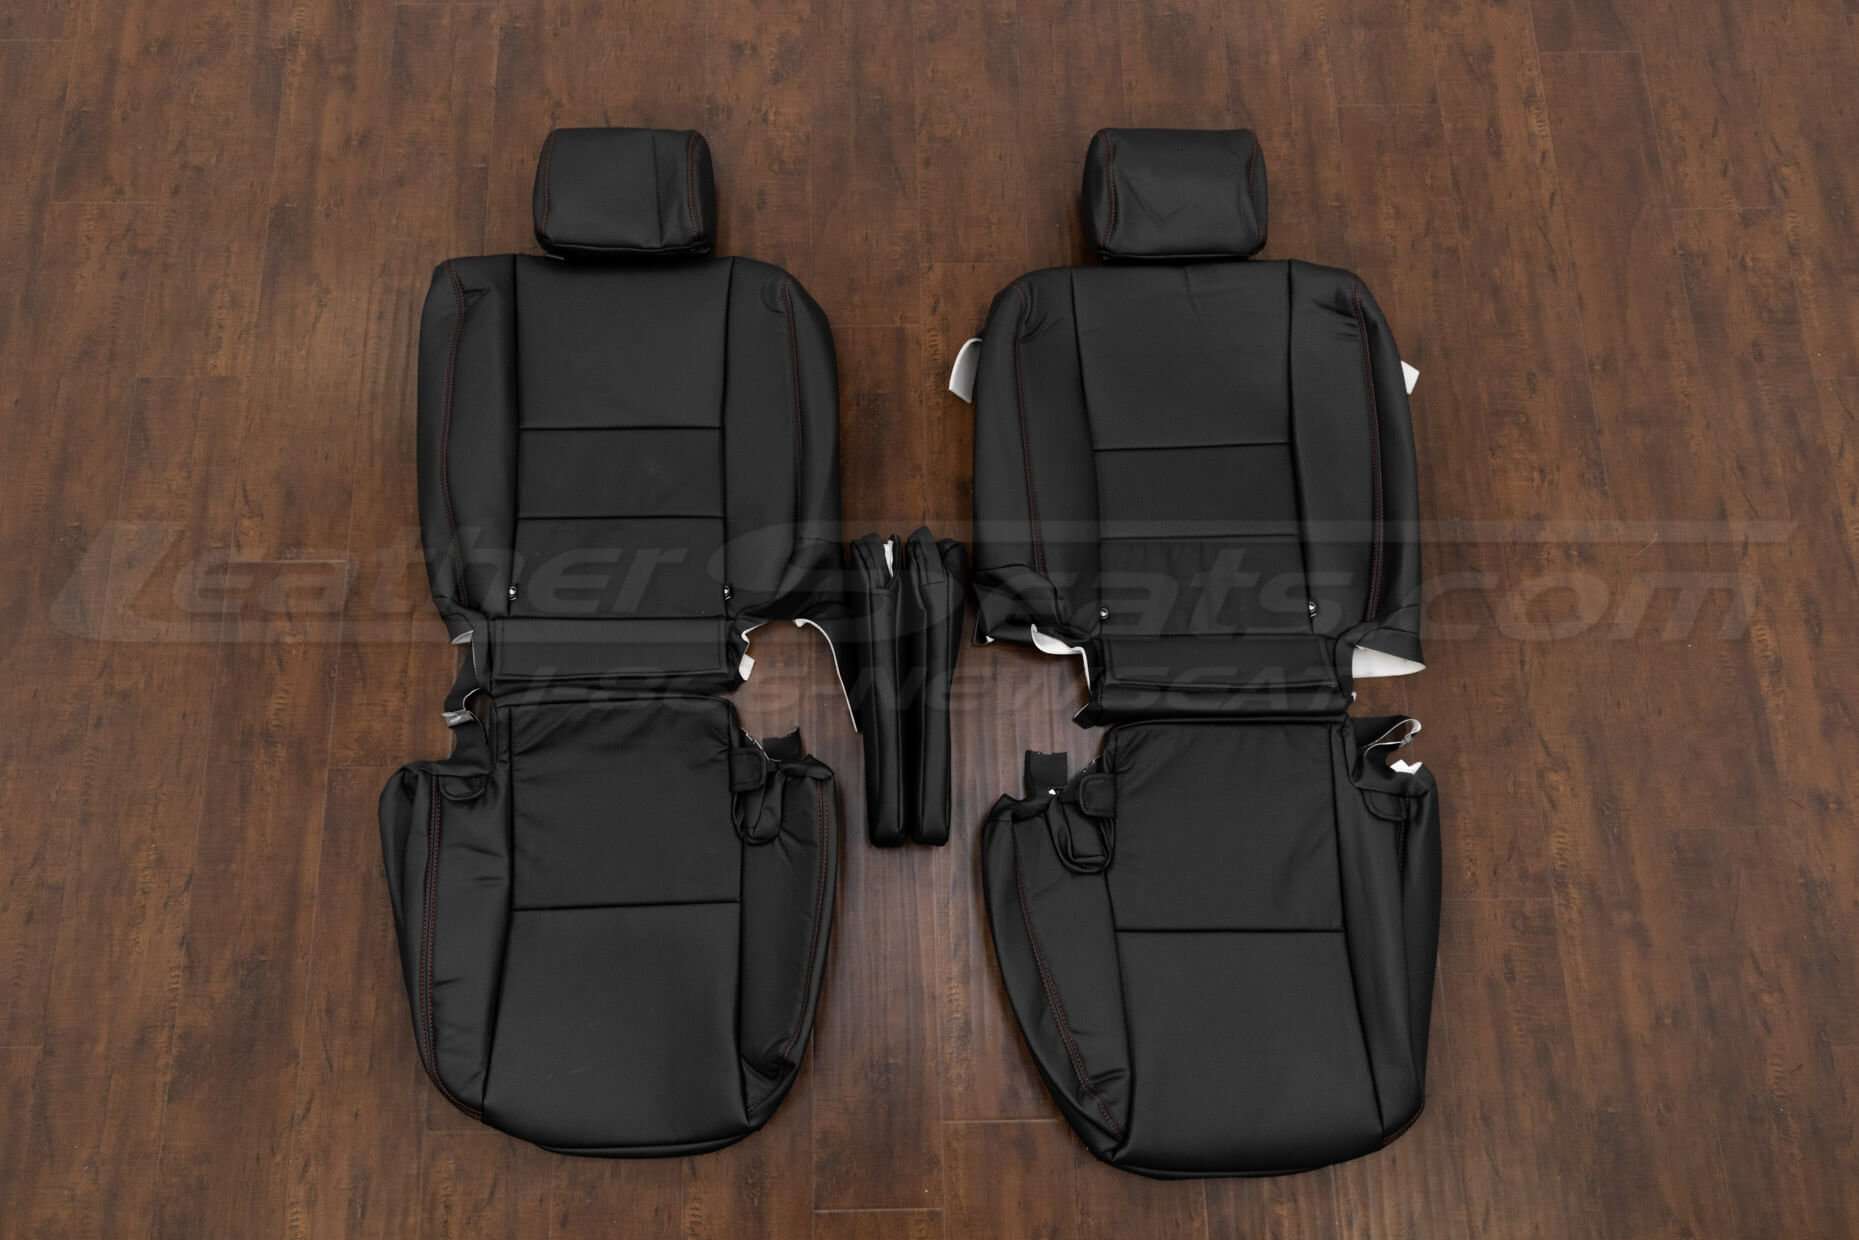 Toyota Sequoia Leather Seat Kit - Black - Middle Row upholstery with Armrests